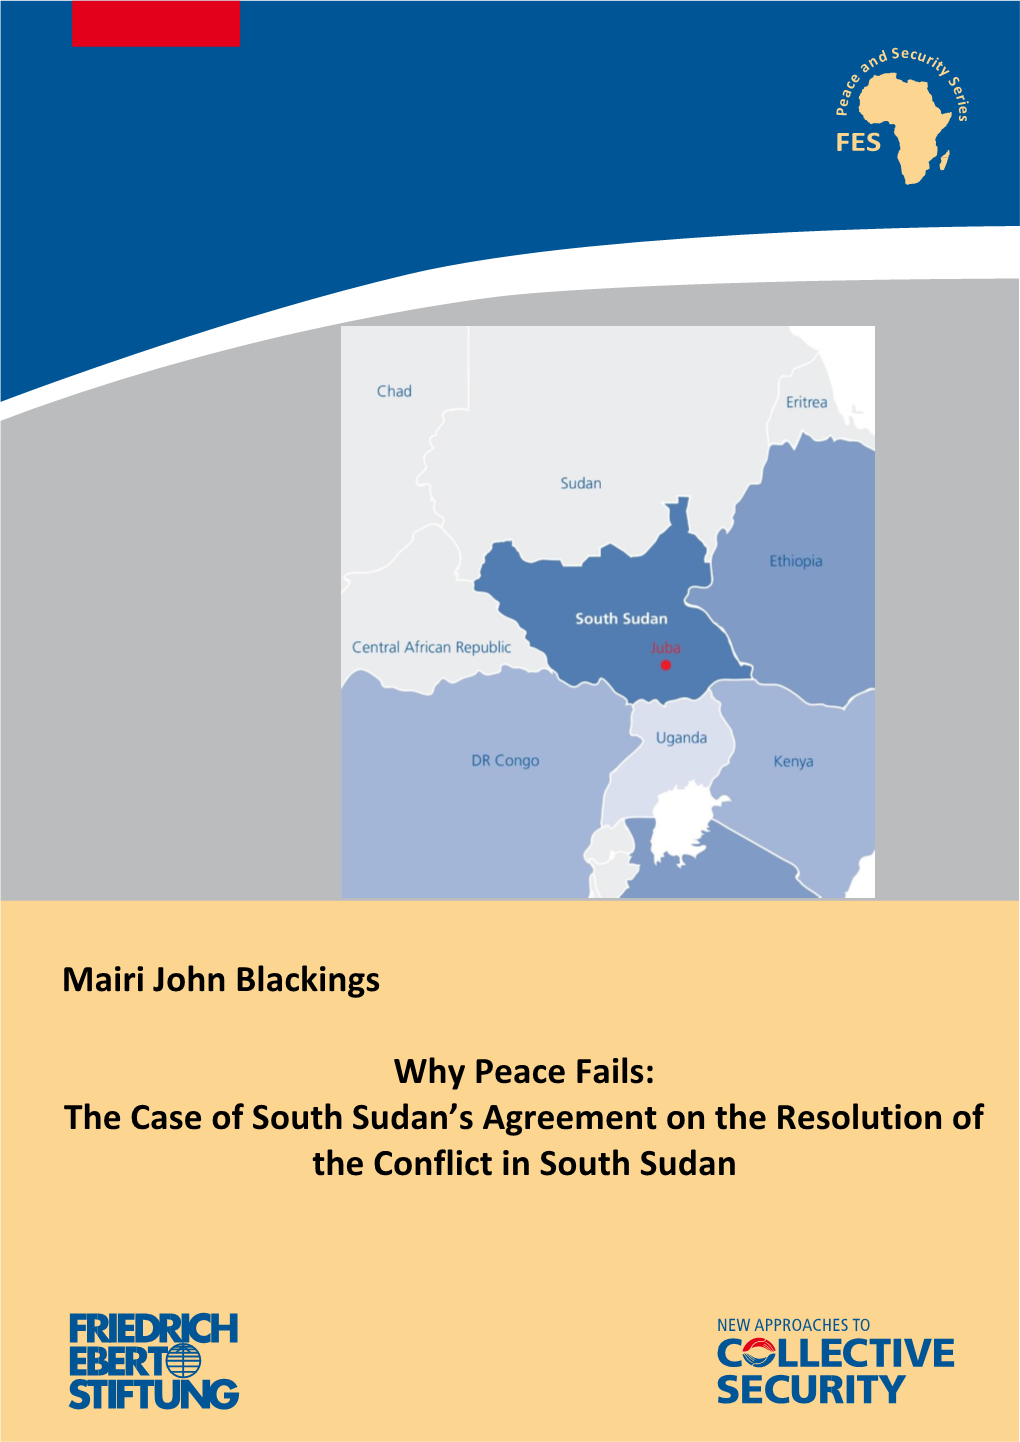 The Case of South Sudan's Agreement on the Resolution of The